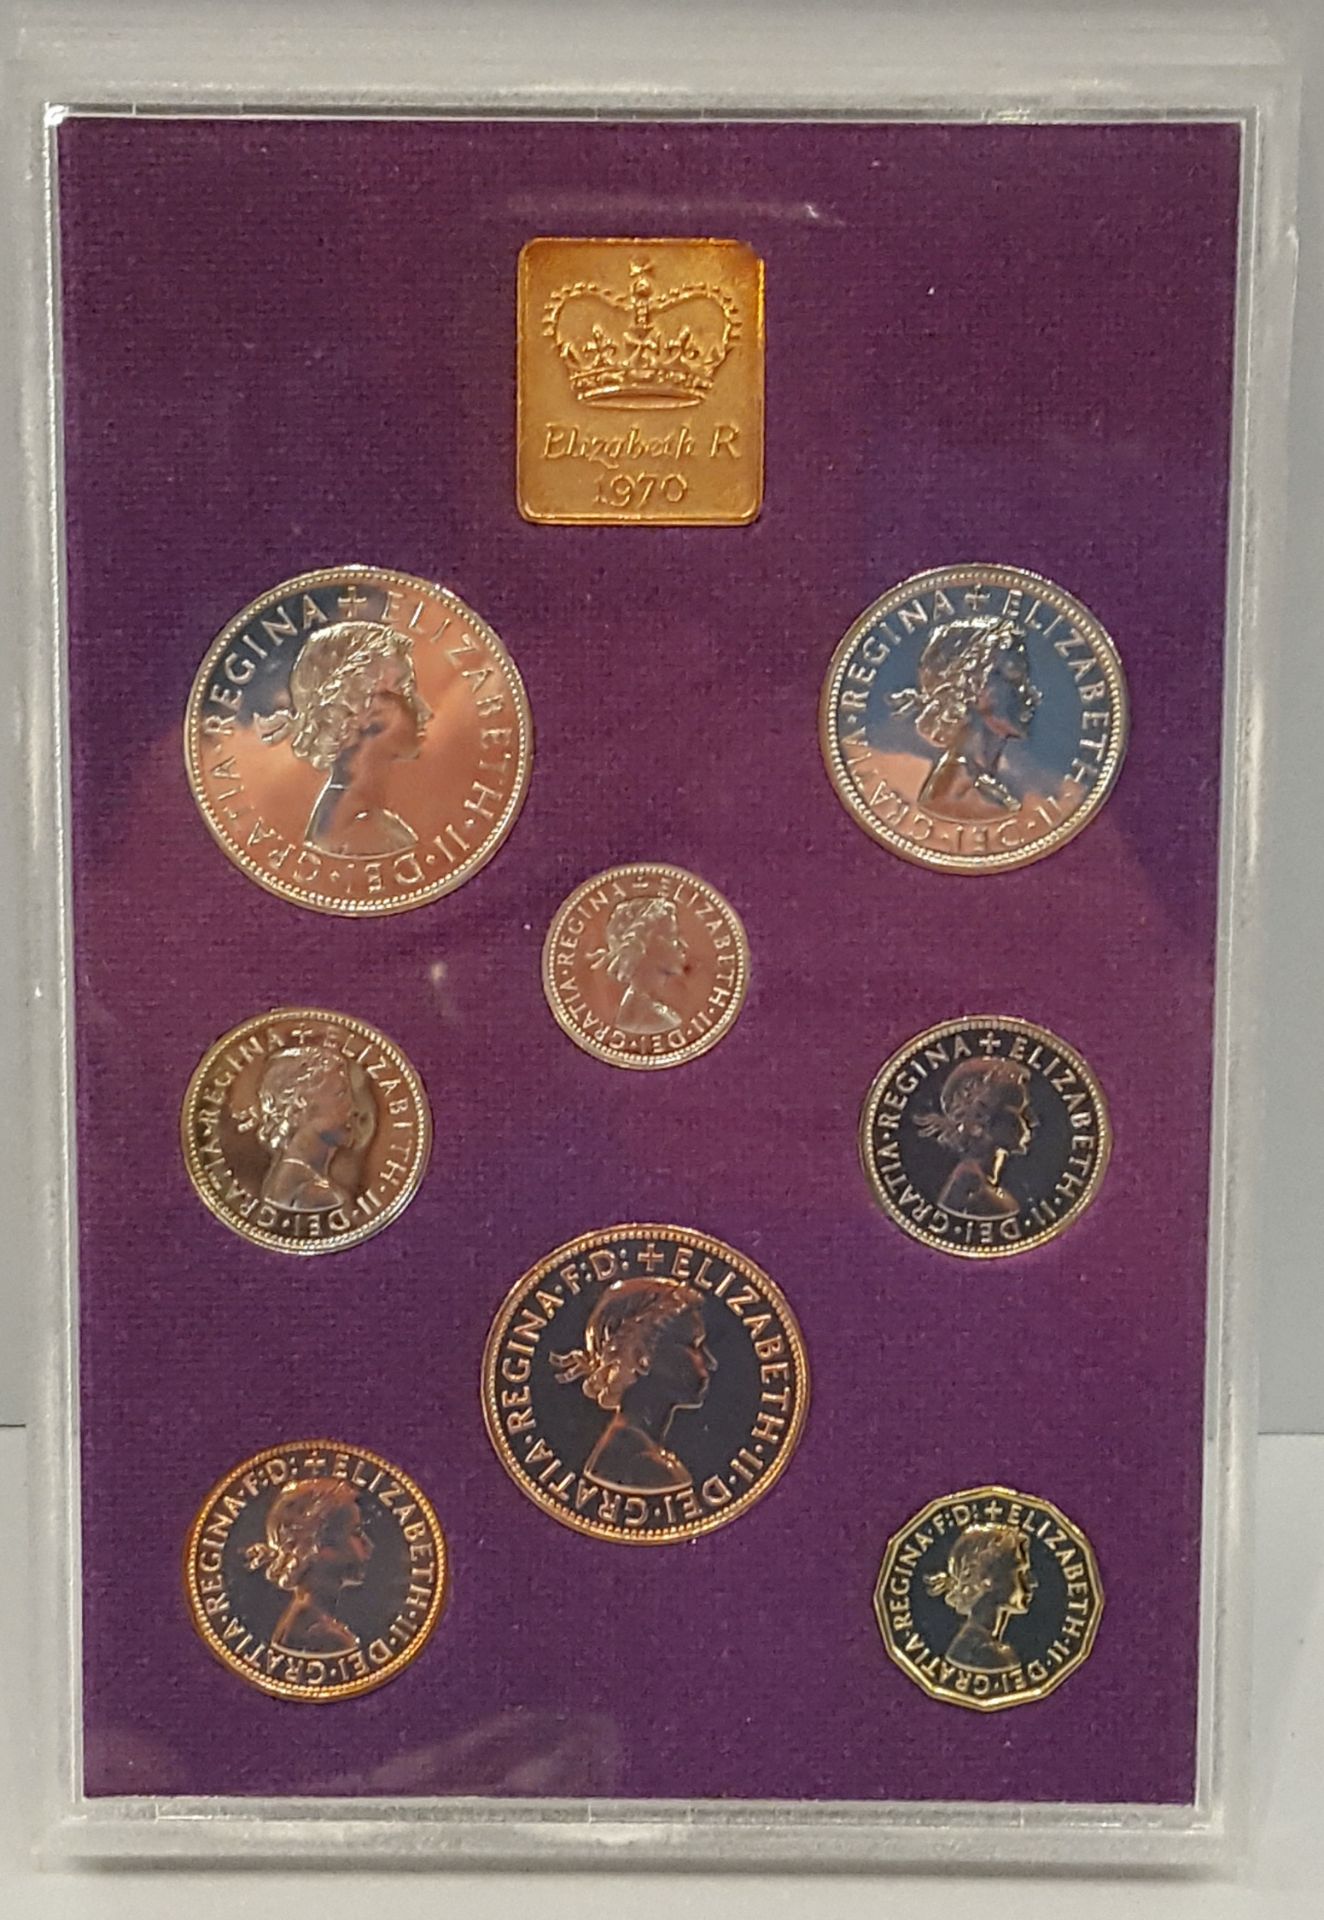 Collectable Coins GB & Northern Ireland Proof Set 1970 - Image 2 of 4